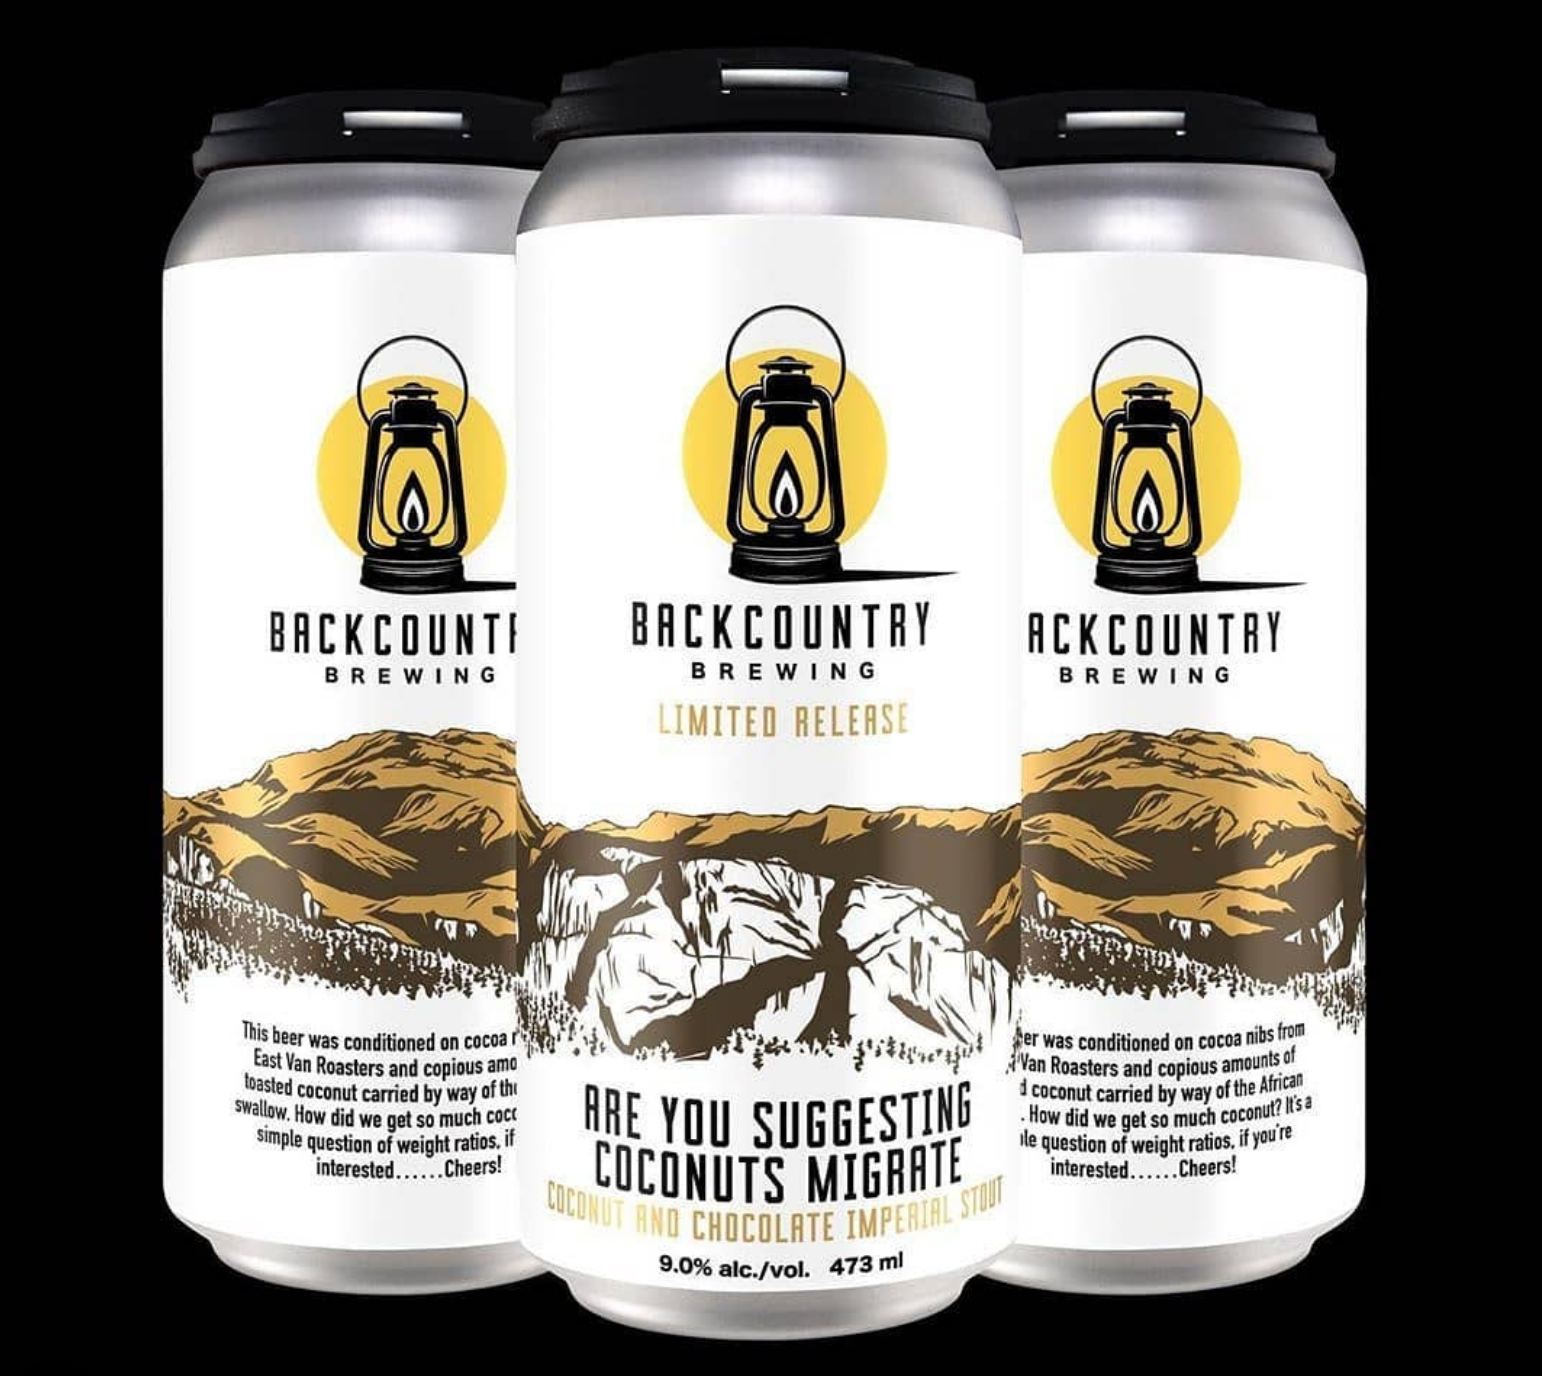 Are You Suggesting Coconuts Migrate? by Backcountry Brewing